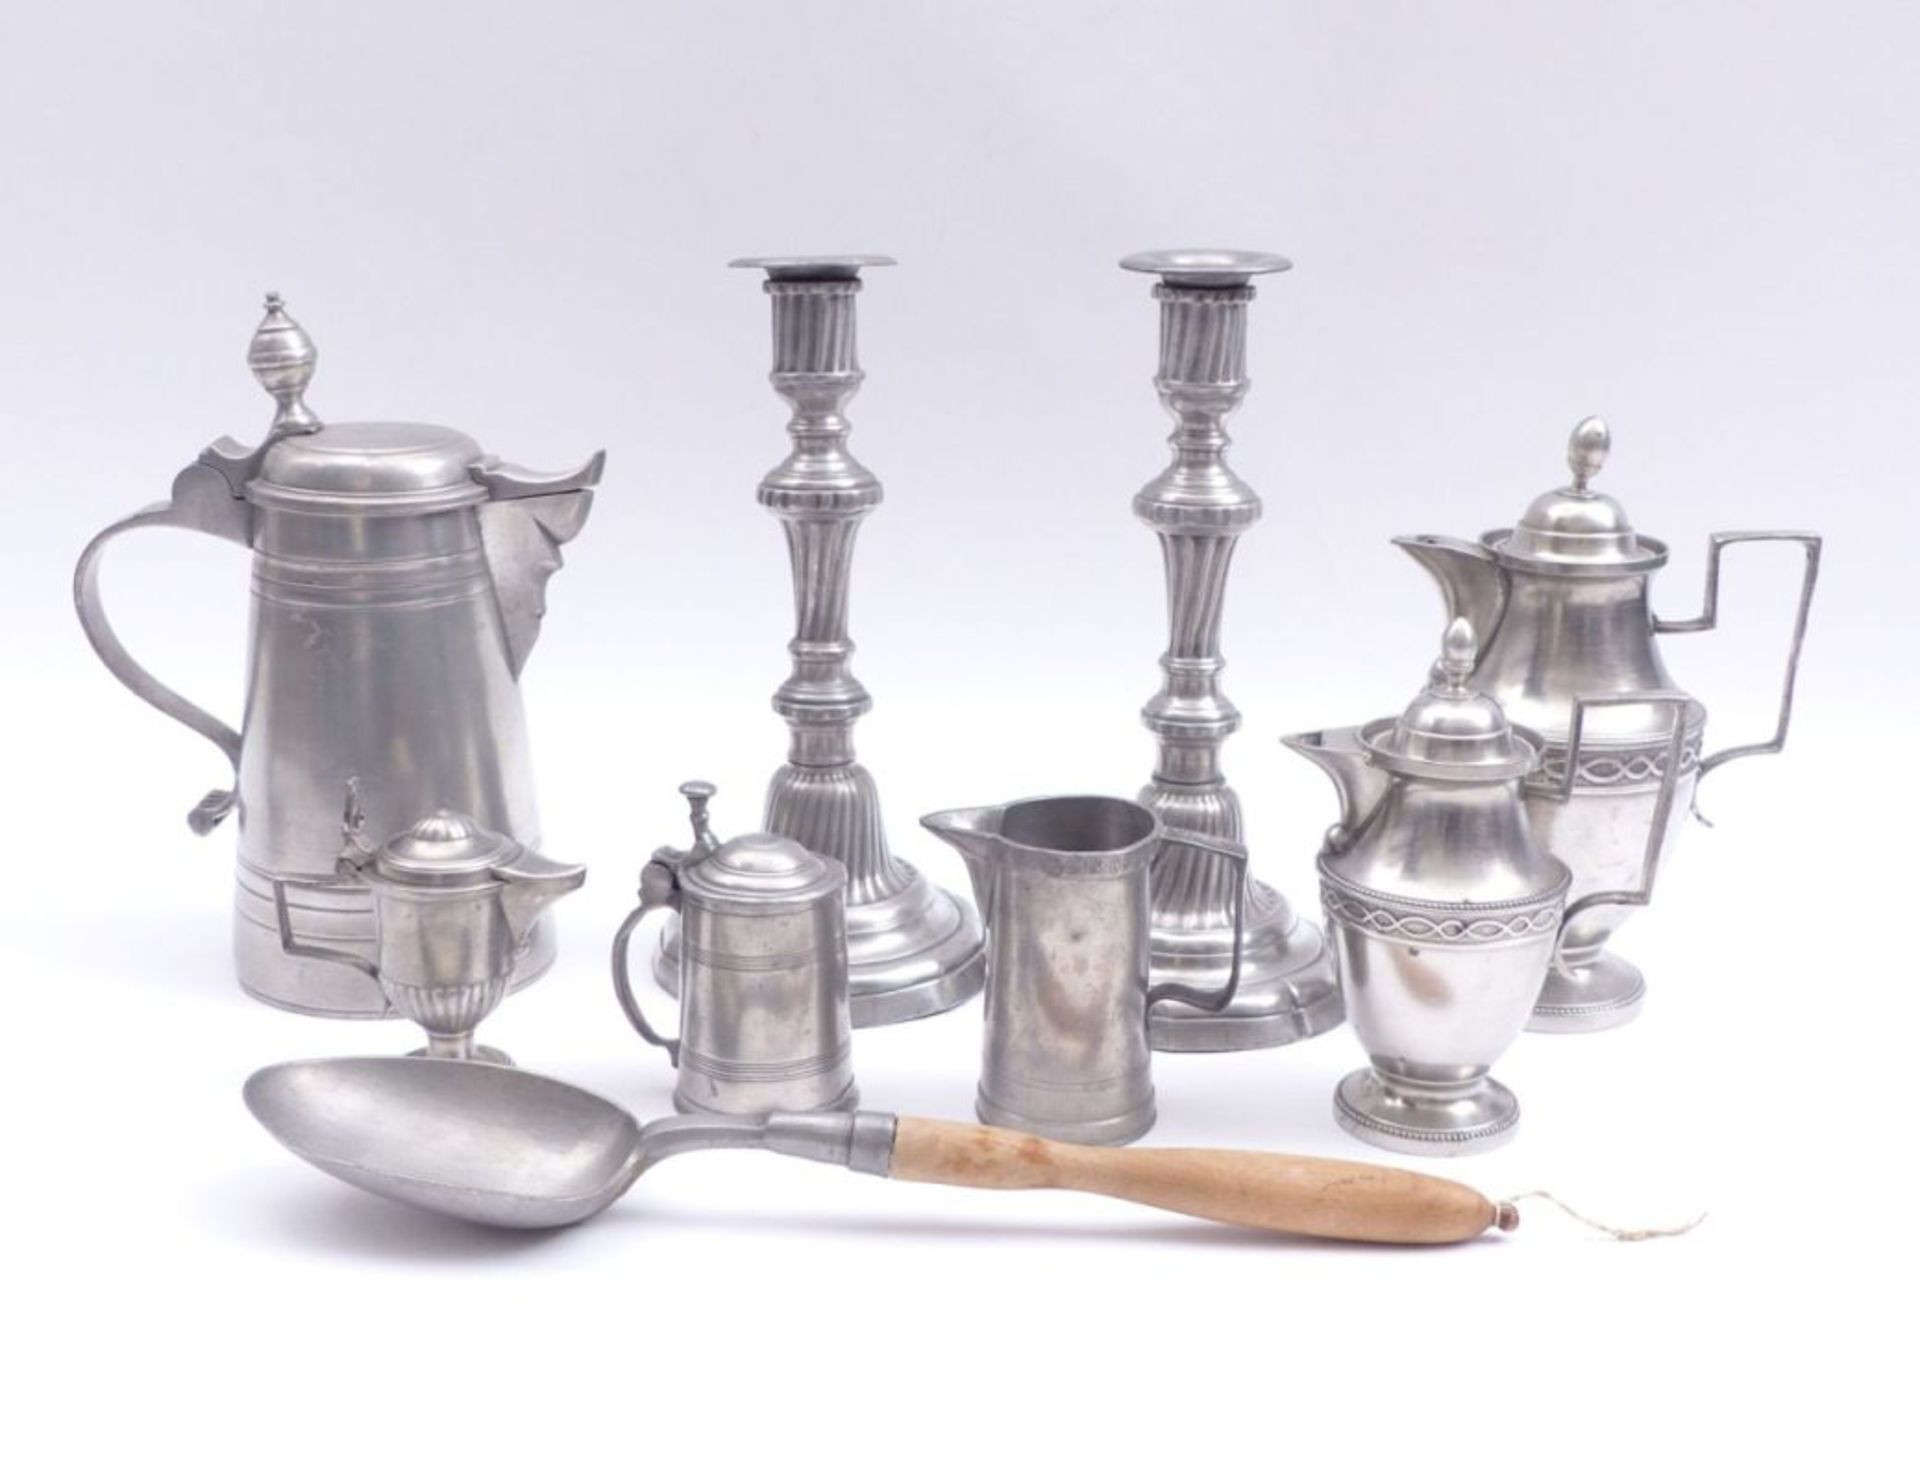 Large pewter collection